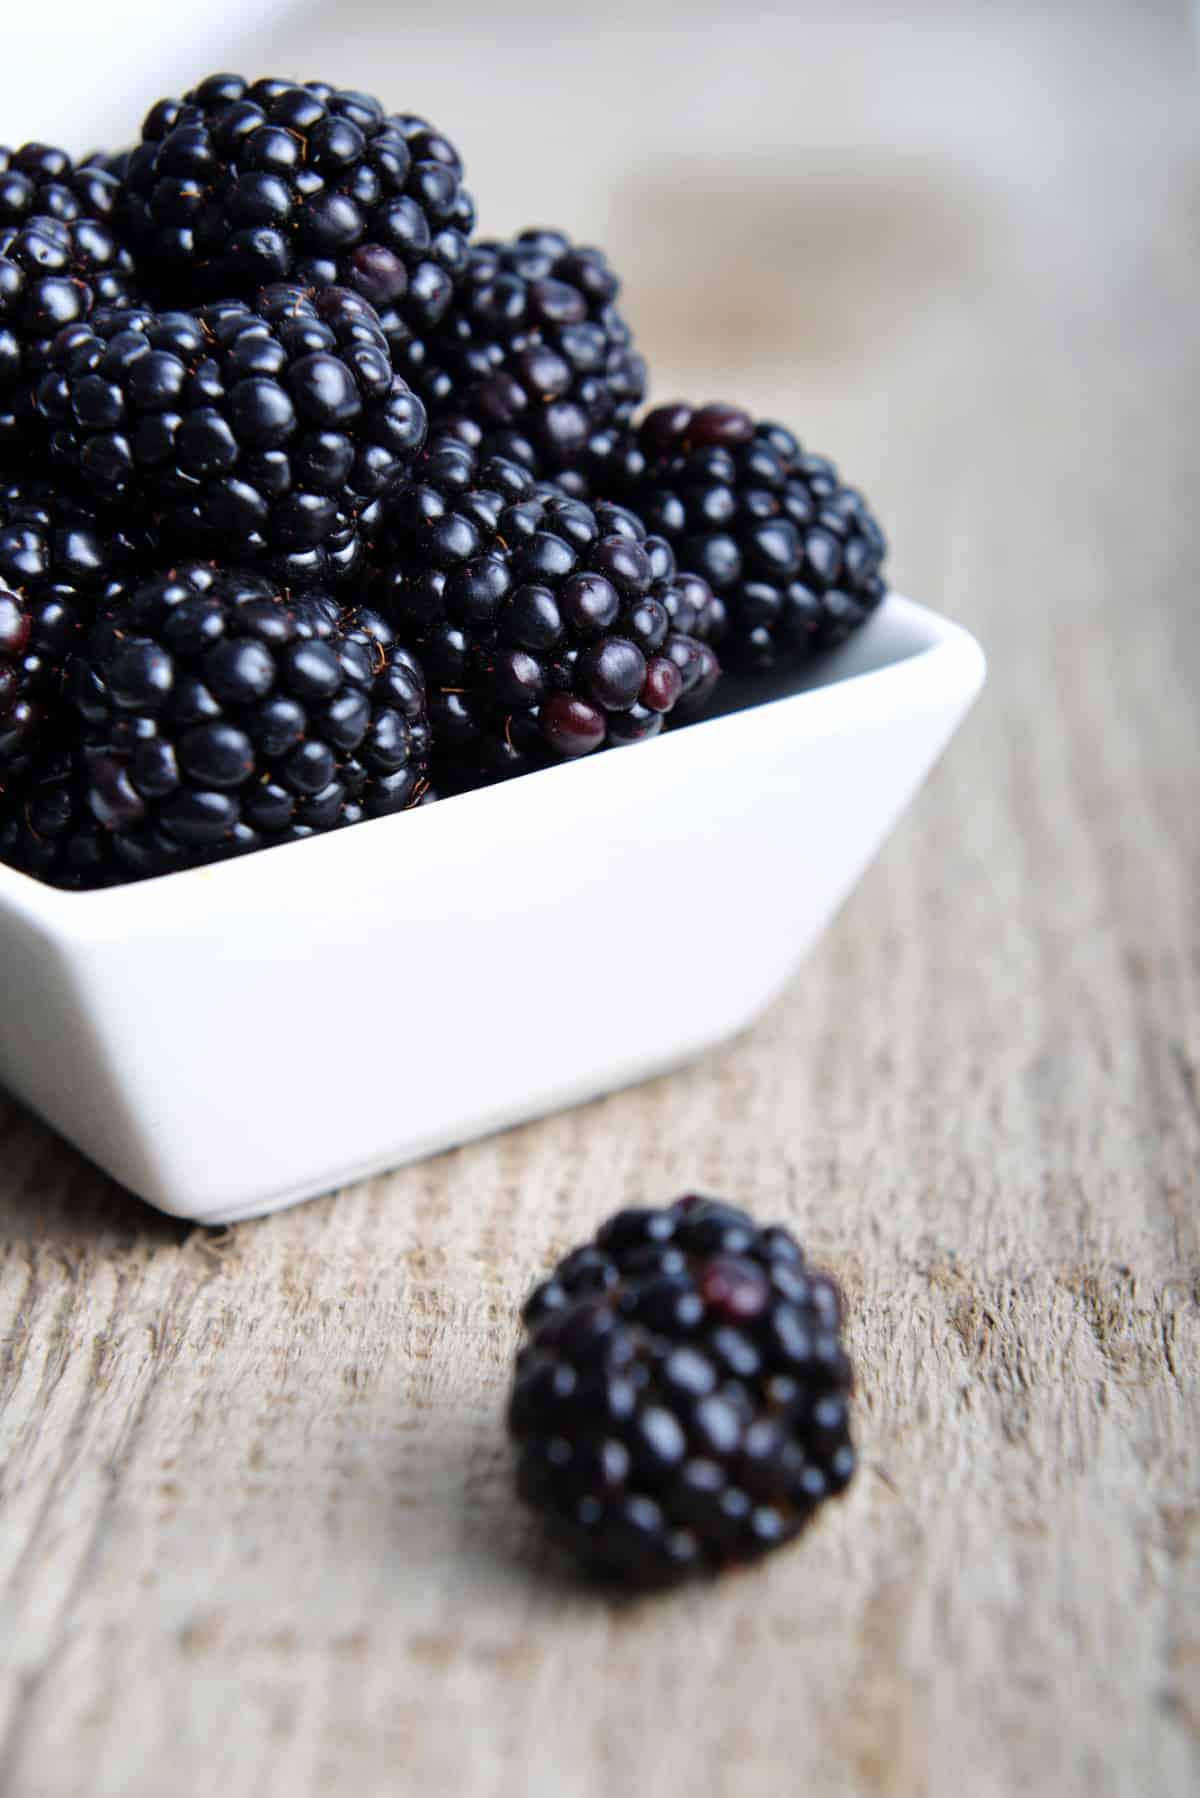 Bowl of fresh blackberries on a wooden table.